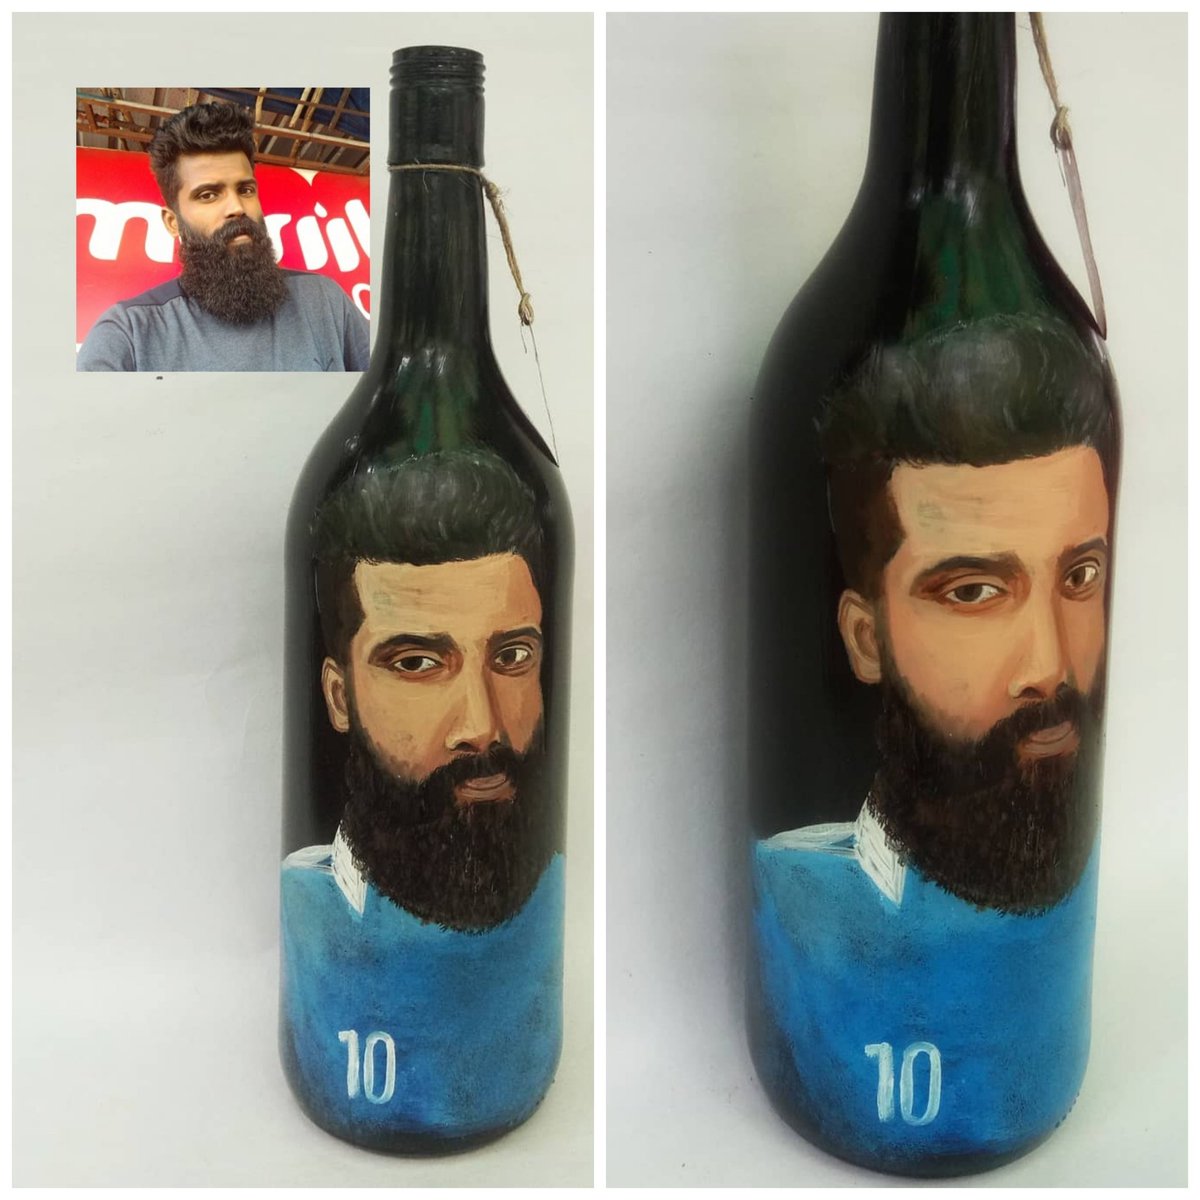 #bottleart  #customizedwork 
✔️Delivery location : kumbala
⬇️⬇️⬇️⬇️⬇️⬇️⬇️⬇️⬇️⬇️
📢FREE SHIPPING 
⬇️⬇️⬇️⬇️⬇️⬇️⬇️⬇️⬇️⬇️
DM💬 for price enquiry 
⬇️⬇️⬇️⬇️⬇️⬇️⬇️⬇️⬇️⬇️
💬+91 9645 918 981